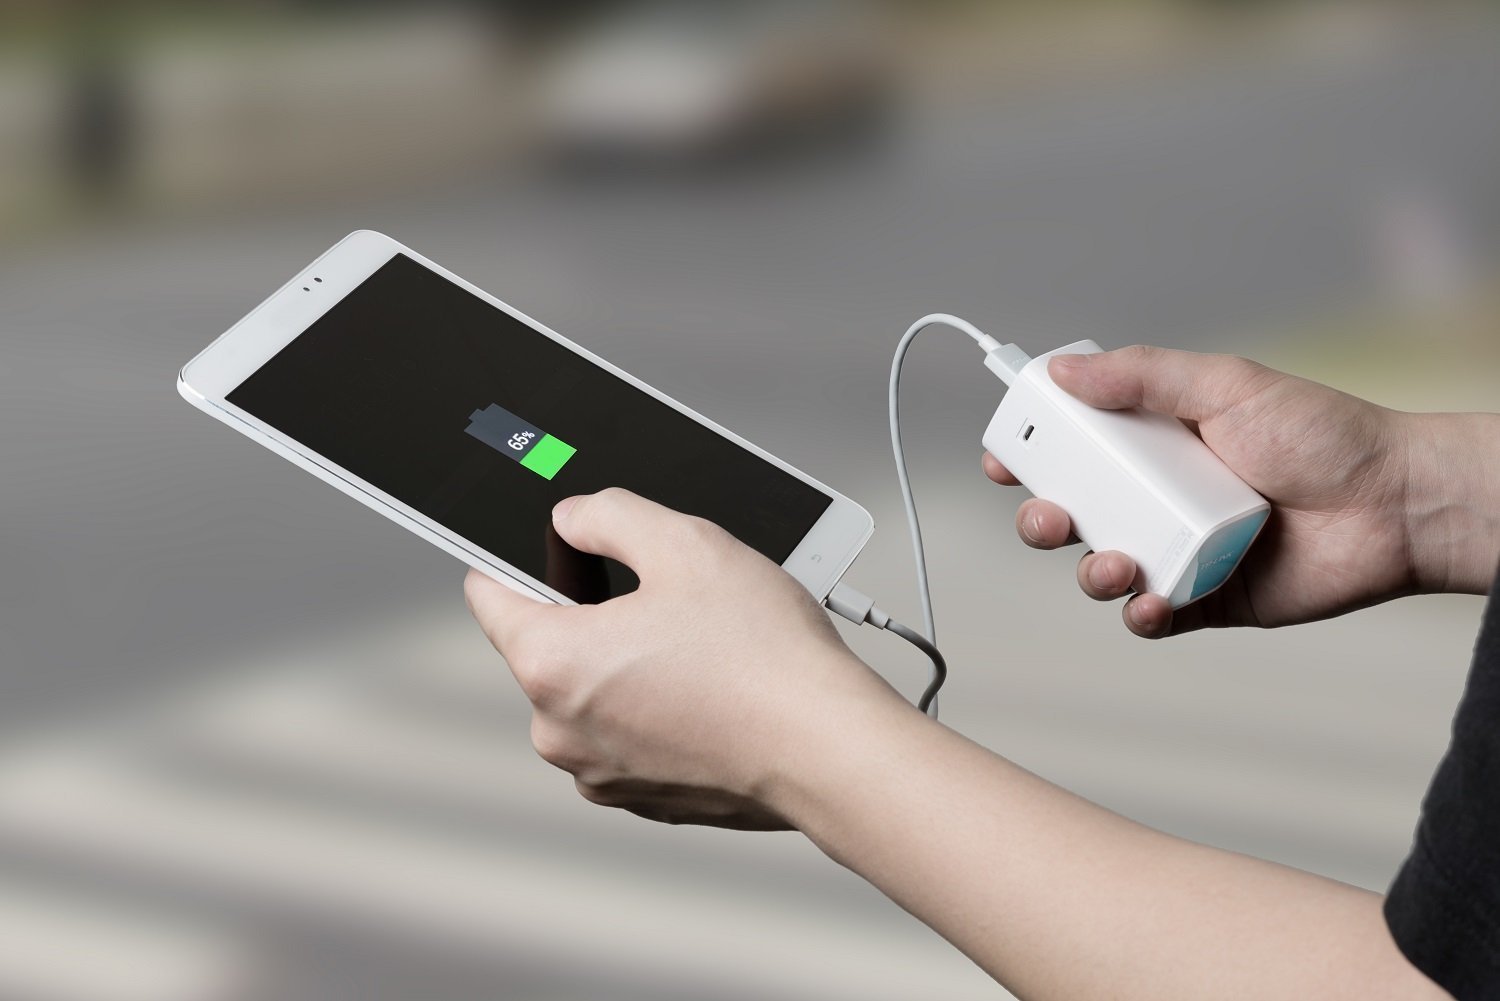 Benefits of portable chargers and power packs for smartphones